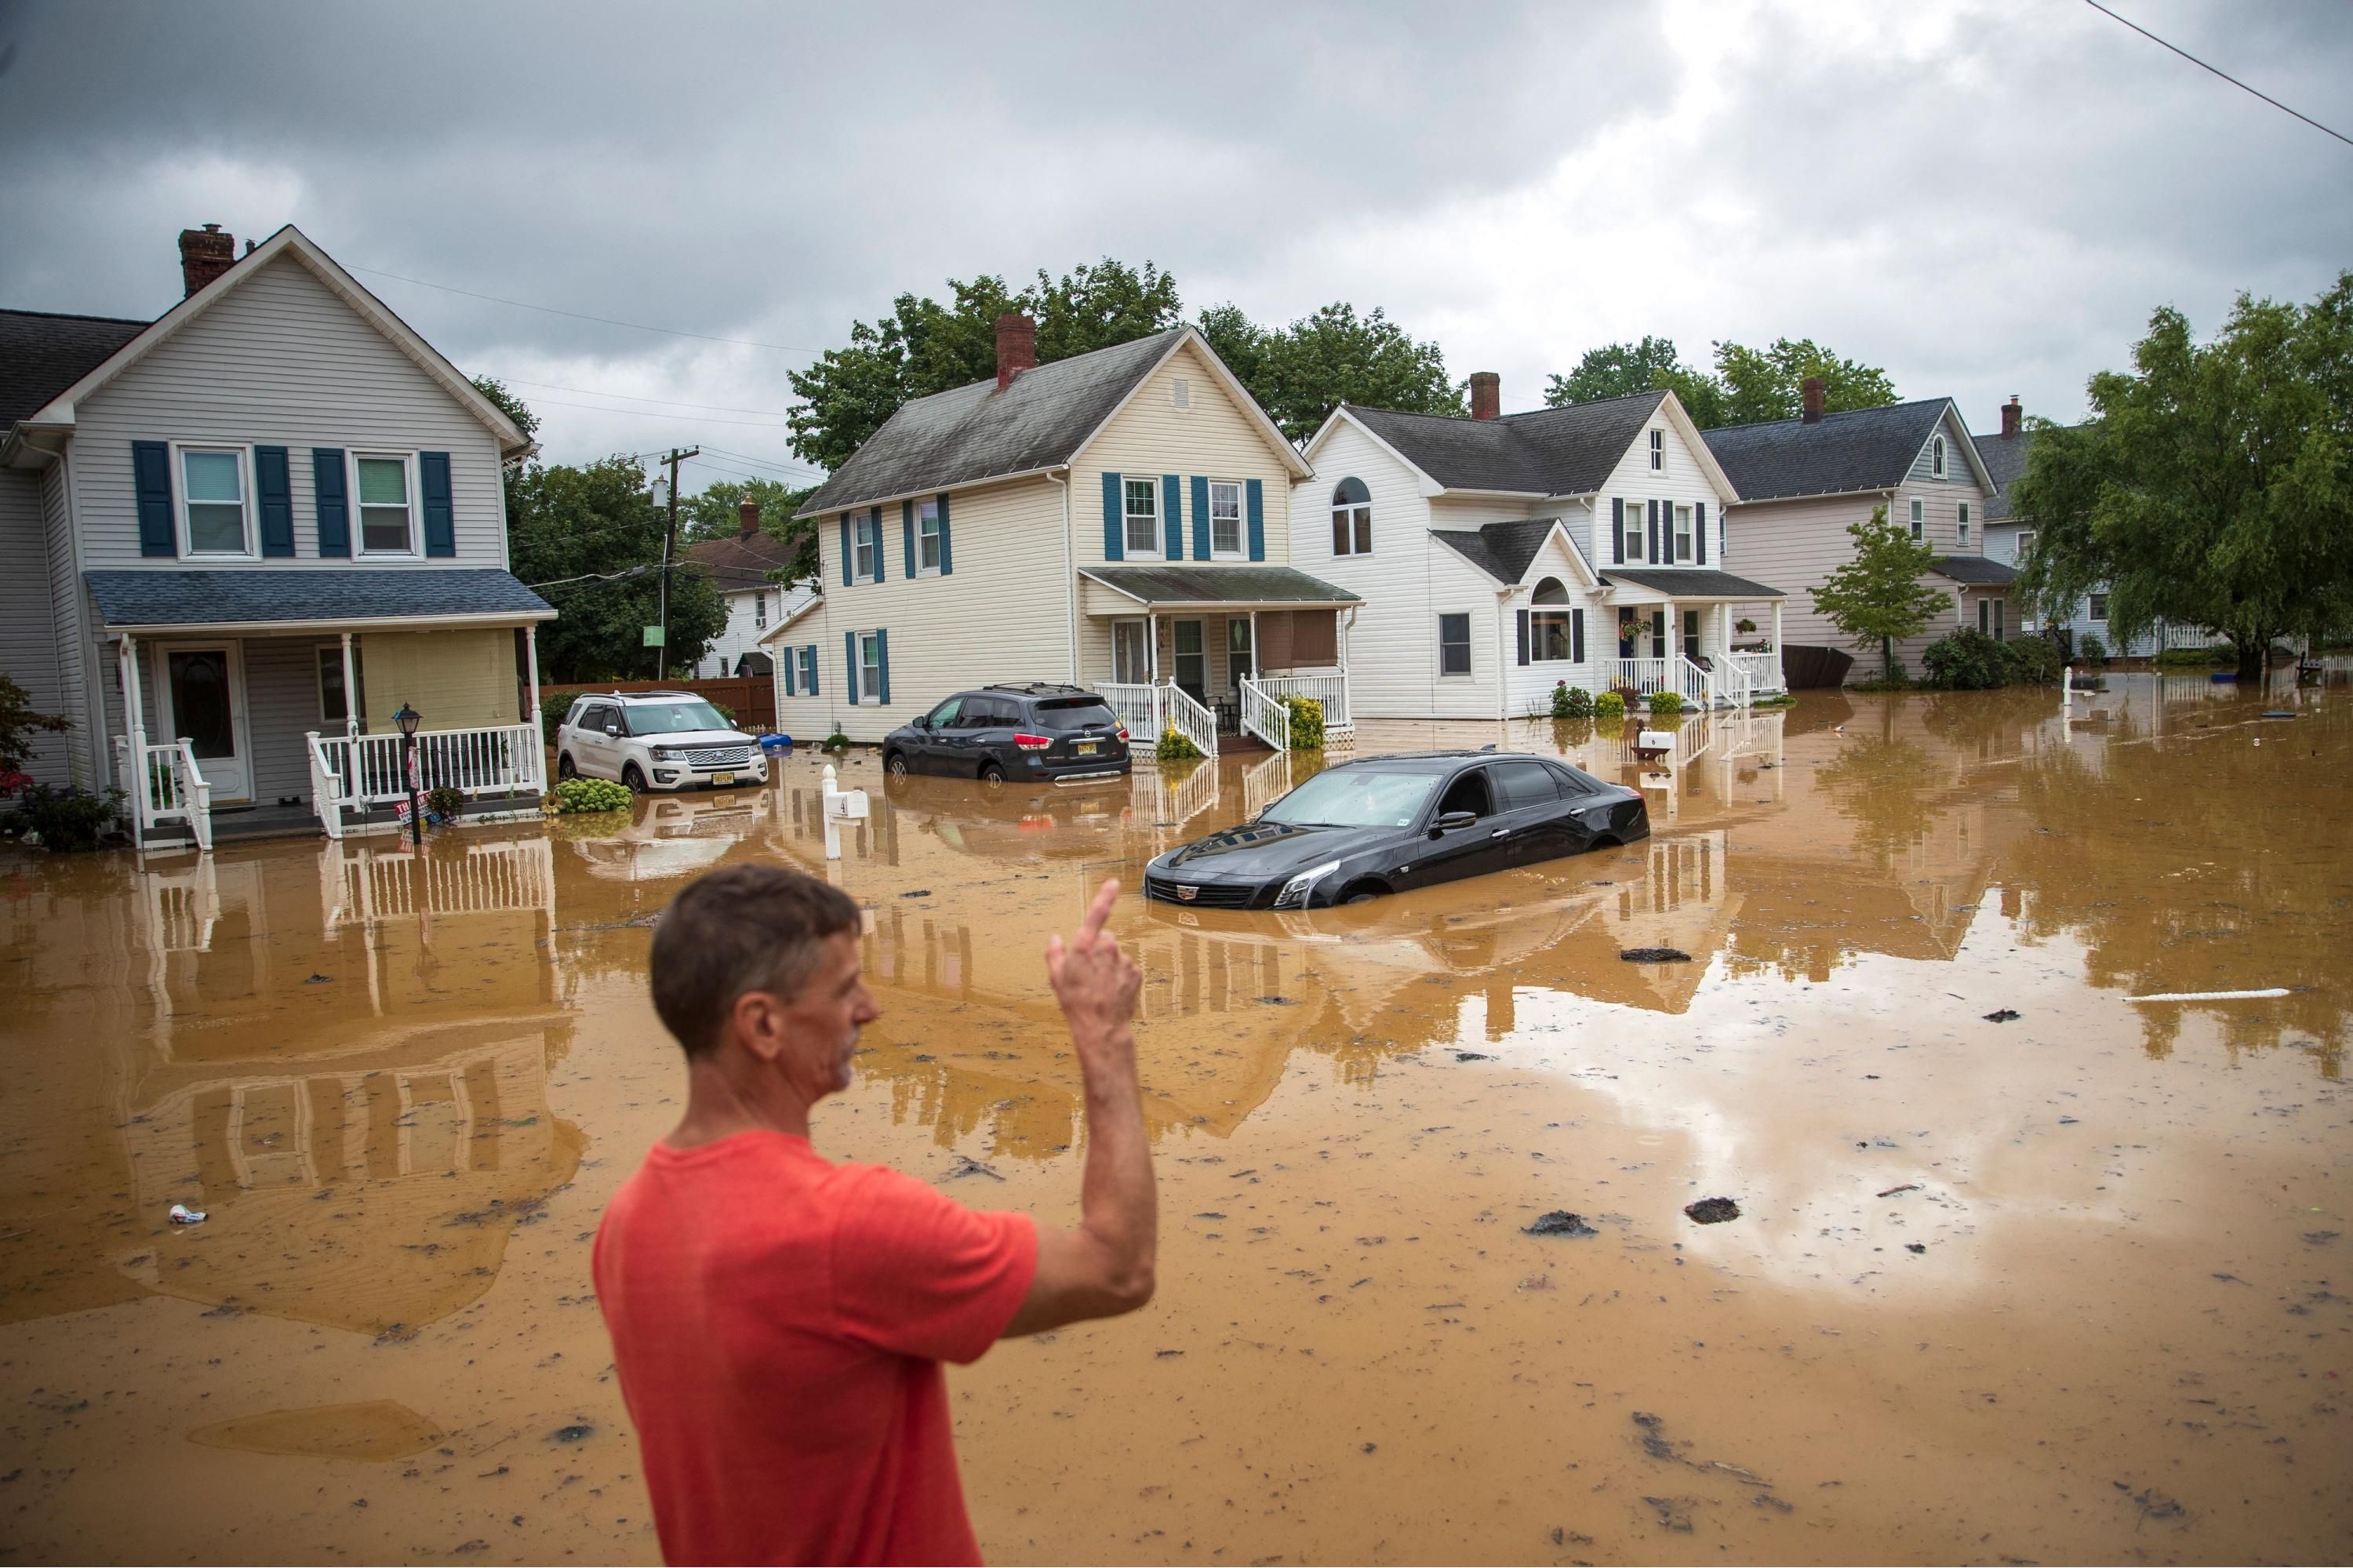 An evacuated resident points in the direction of his home following a flash flood, which came as Tropical Storm Henri made landfall, in Helmetta, New Jersey on August 22, 2021. (Photo: Tom Brenner/AFP via Getty Images)